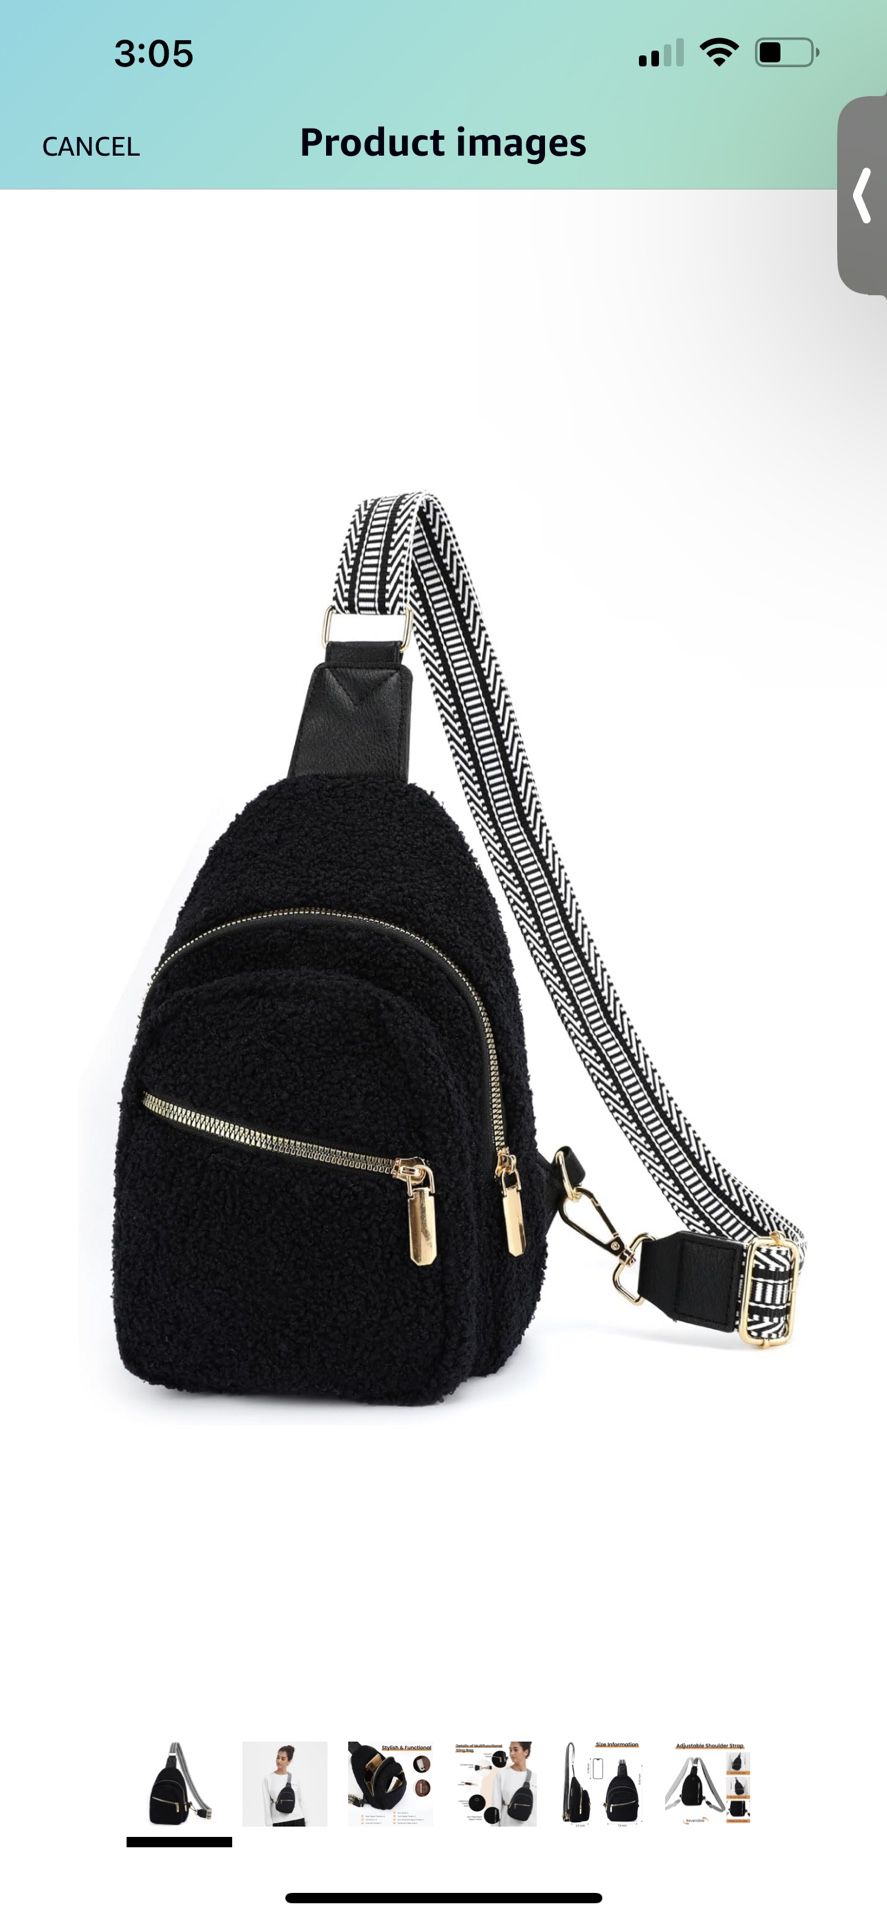 Brand New Sling Bag for Women Men, Leather Cross Body Fanny Pack Crossbody Chest Bag Anti Theft Purse with Adjustable Strap